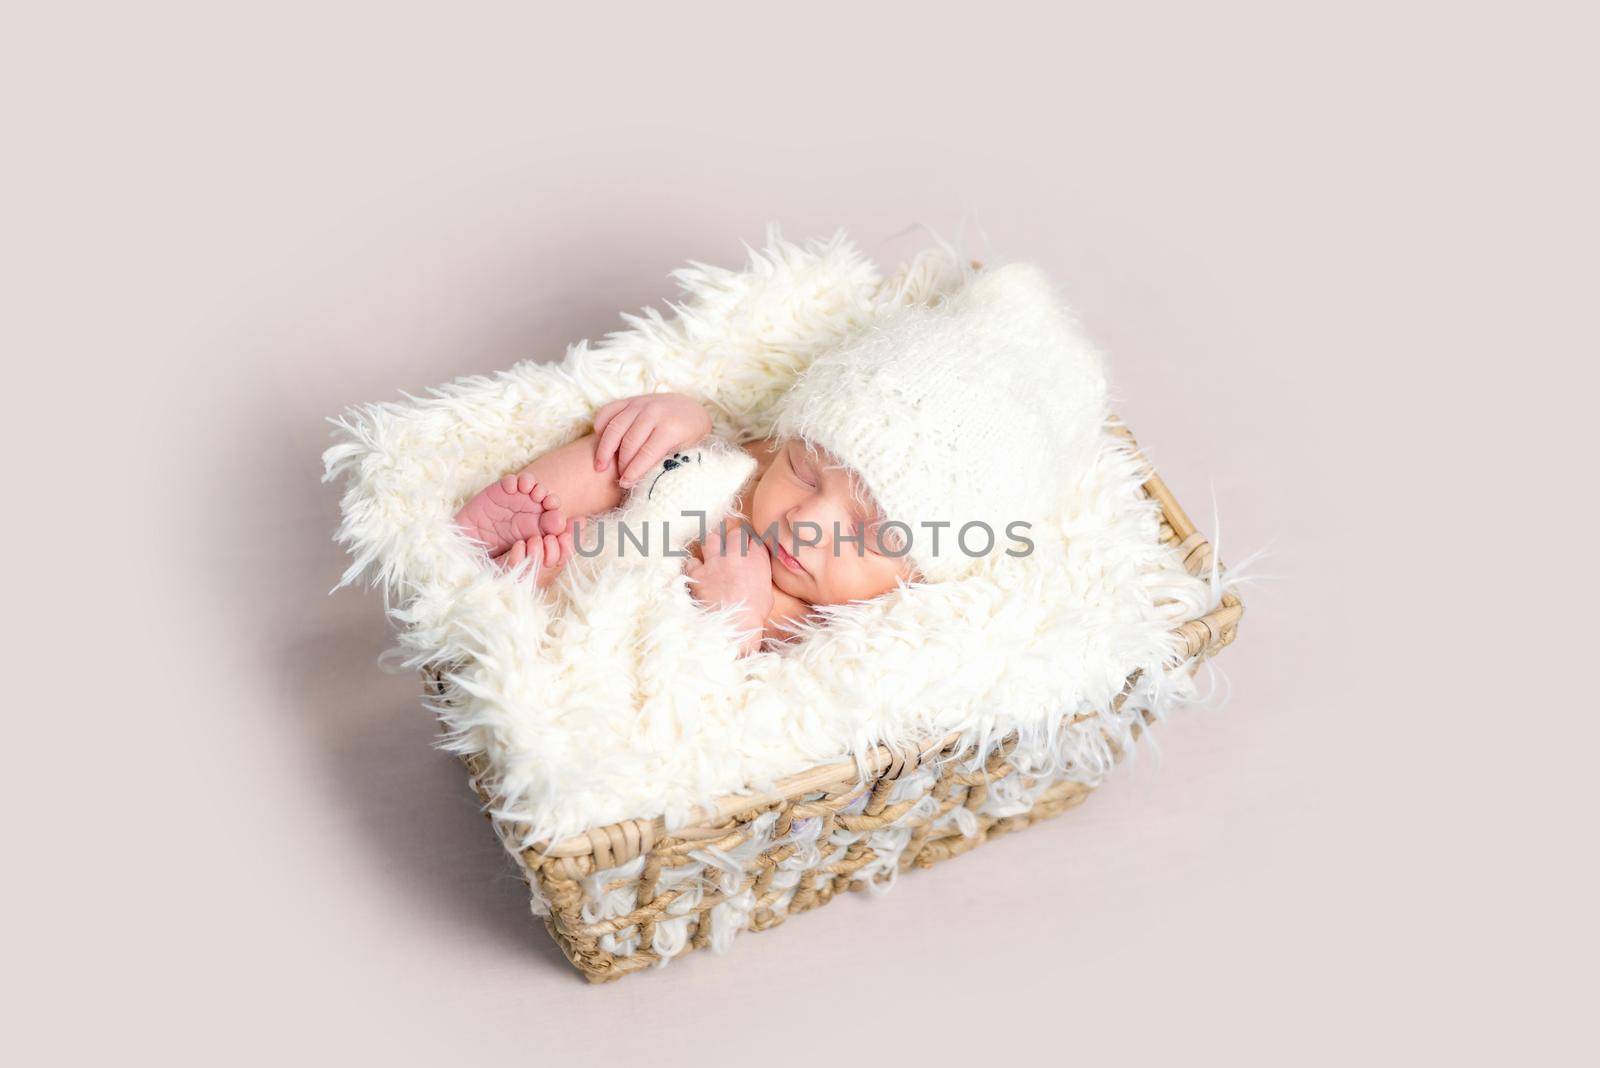 Adorable newborn baby asleep on back with legs curled up. Little baby holding plush toy while sleeping in white costume